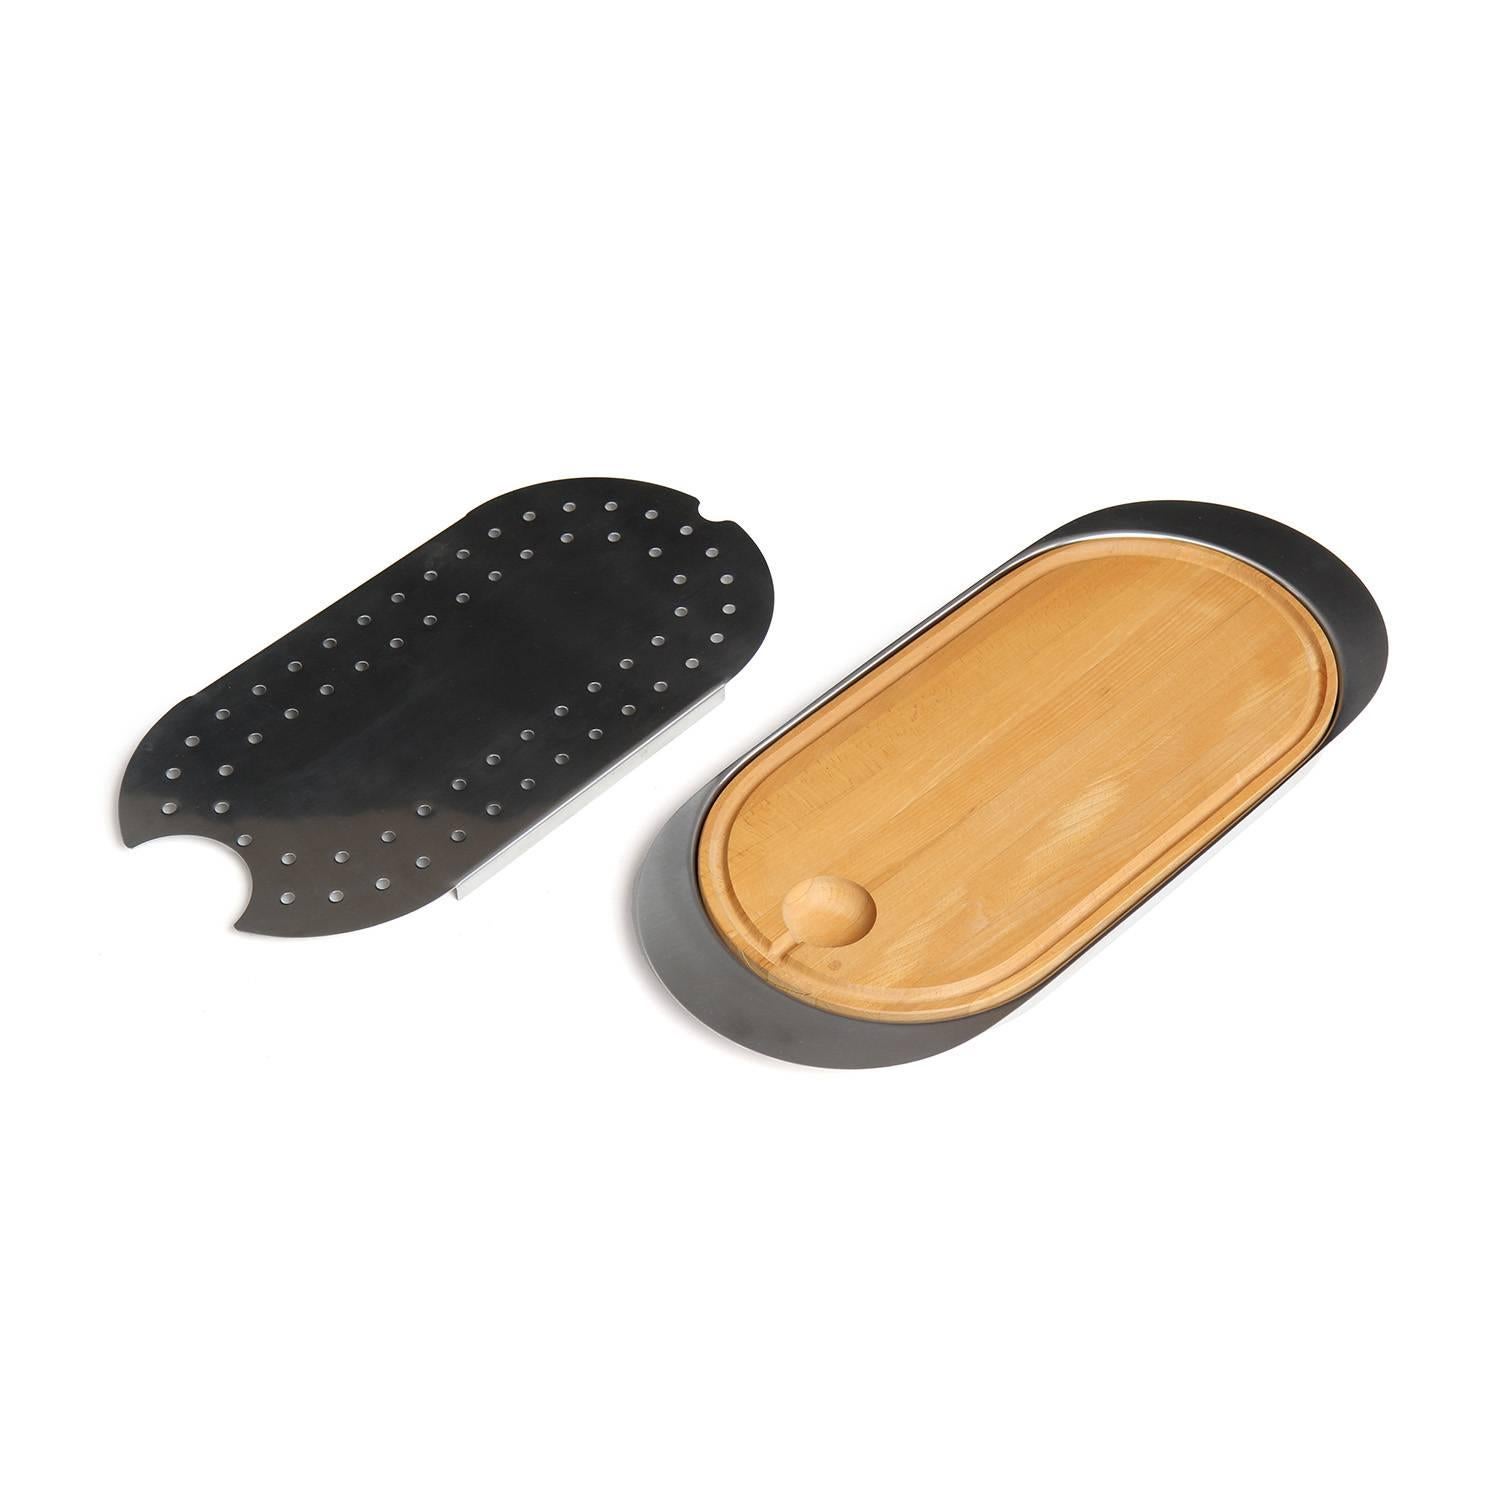 A masterfully crafted, multifunctional minimalist oval serving and cutting board in polished stainless steel having and inset wooden board and a removable perforated steel cover.